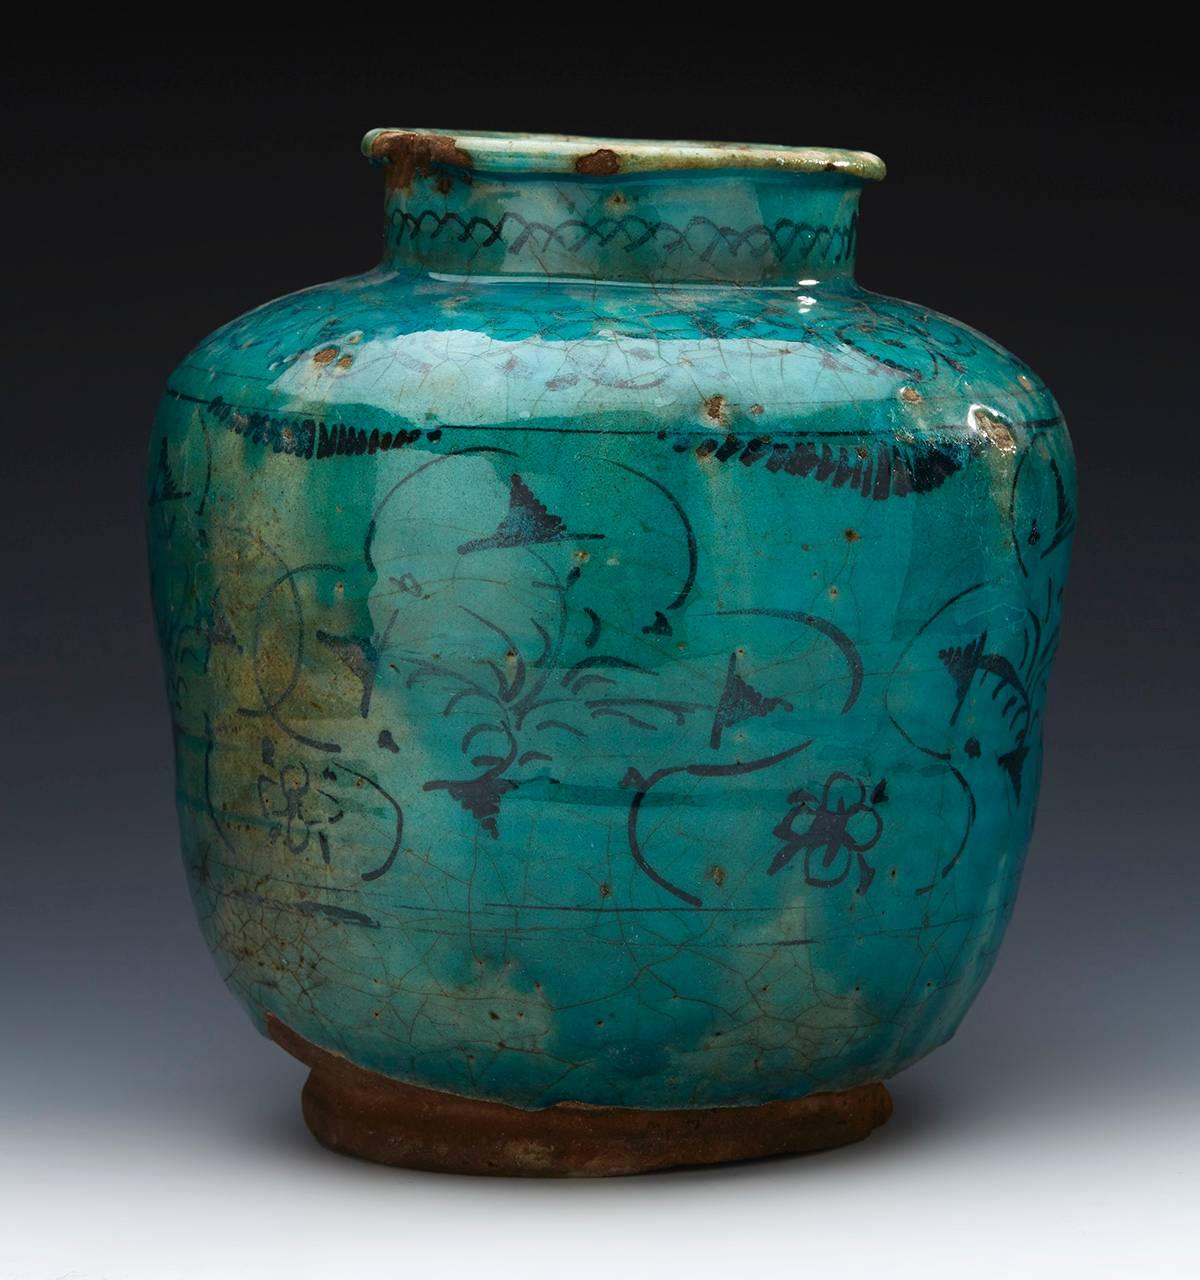 A large antique Middle Eastern vase, believed Kashan, decorated in turquoise glazes with black patterned designs. The earthenware vase is of bulbous rounded shape with a narrow short funnel neck and is not marked with an unglazed foot and base.